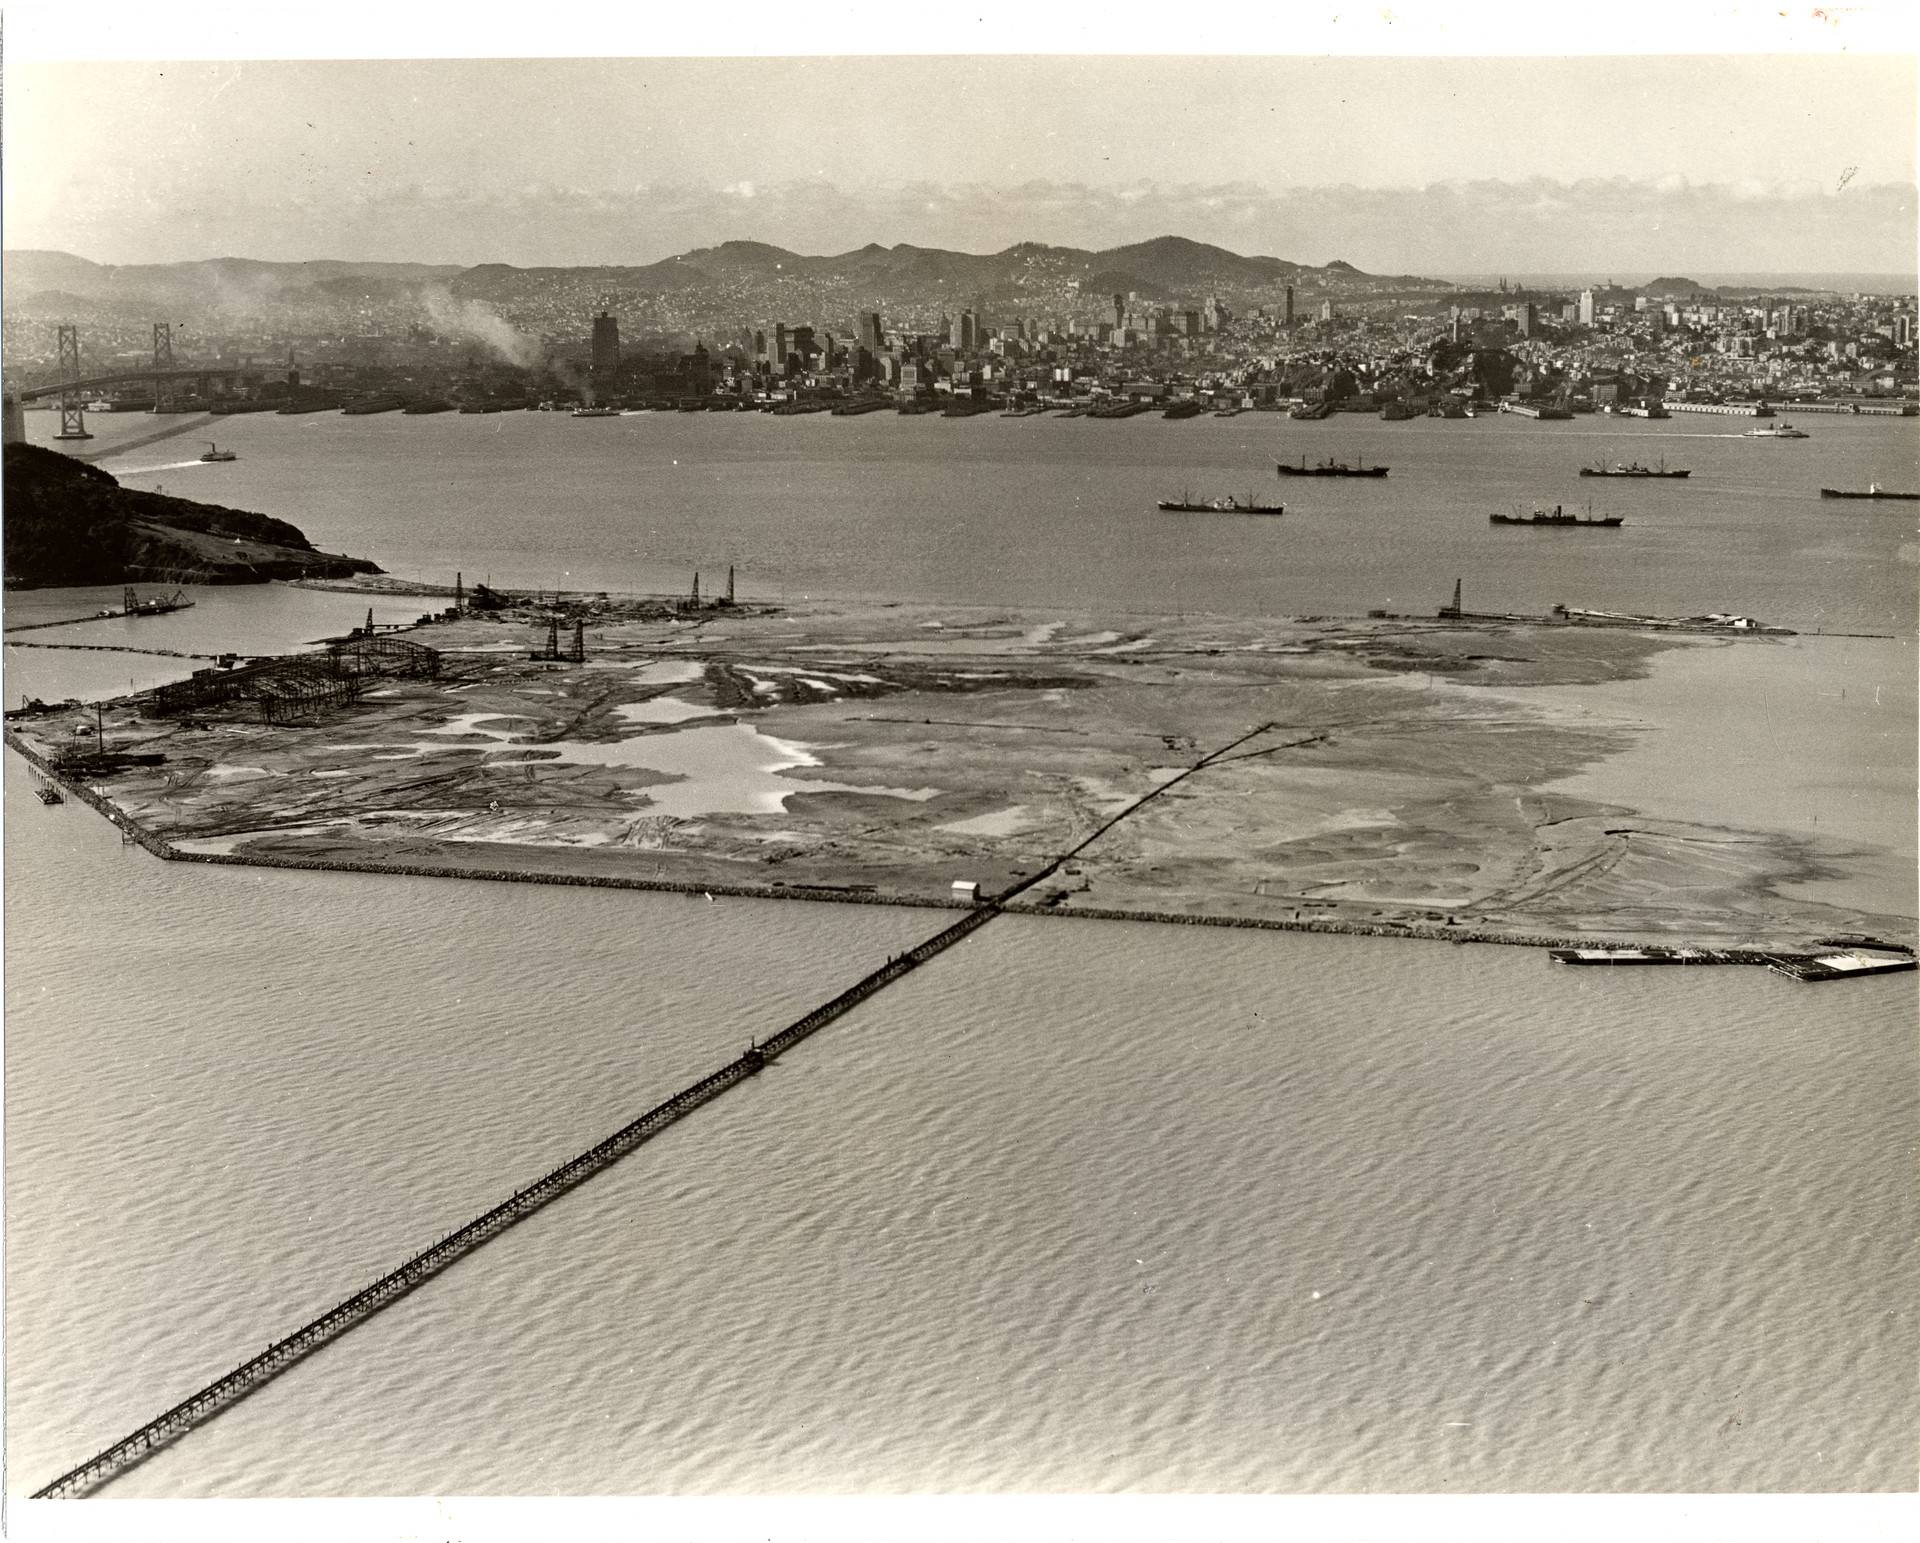 Treasure Island is man-made, engineered with bay mud on a shoal adjacent to naturally occurring Yerba Buena. San Francisco History Center/San Francisco Public Library